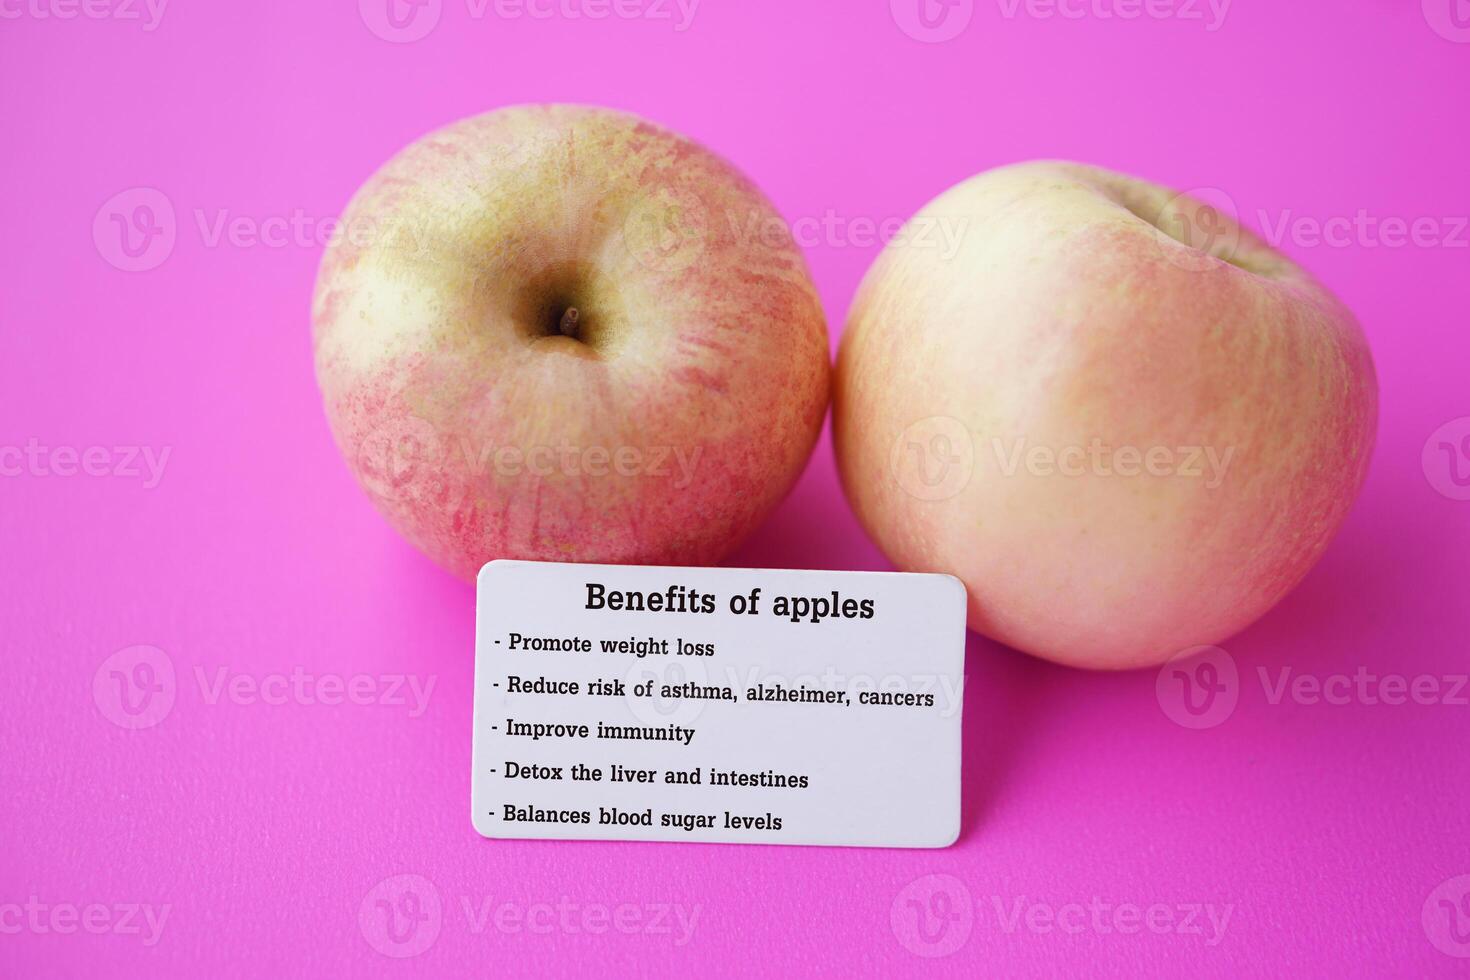 Two apples with tag of text Benefits of apples. Pink background. Concept, Apple fruits with good qualification for health. Photo for education. Teaching aid. Healthy food, fruit lesson.